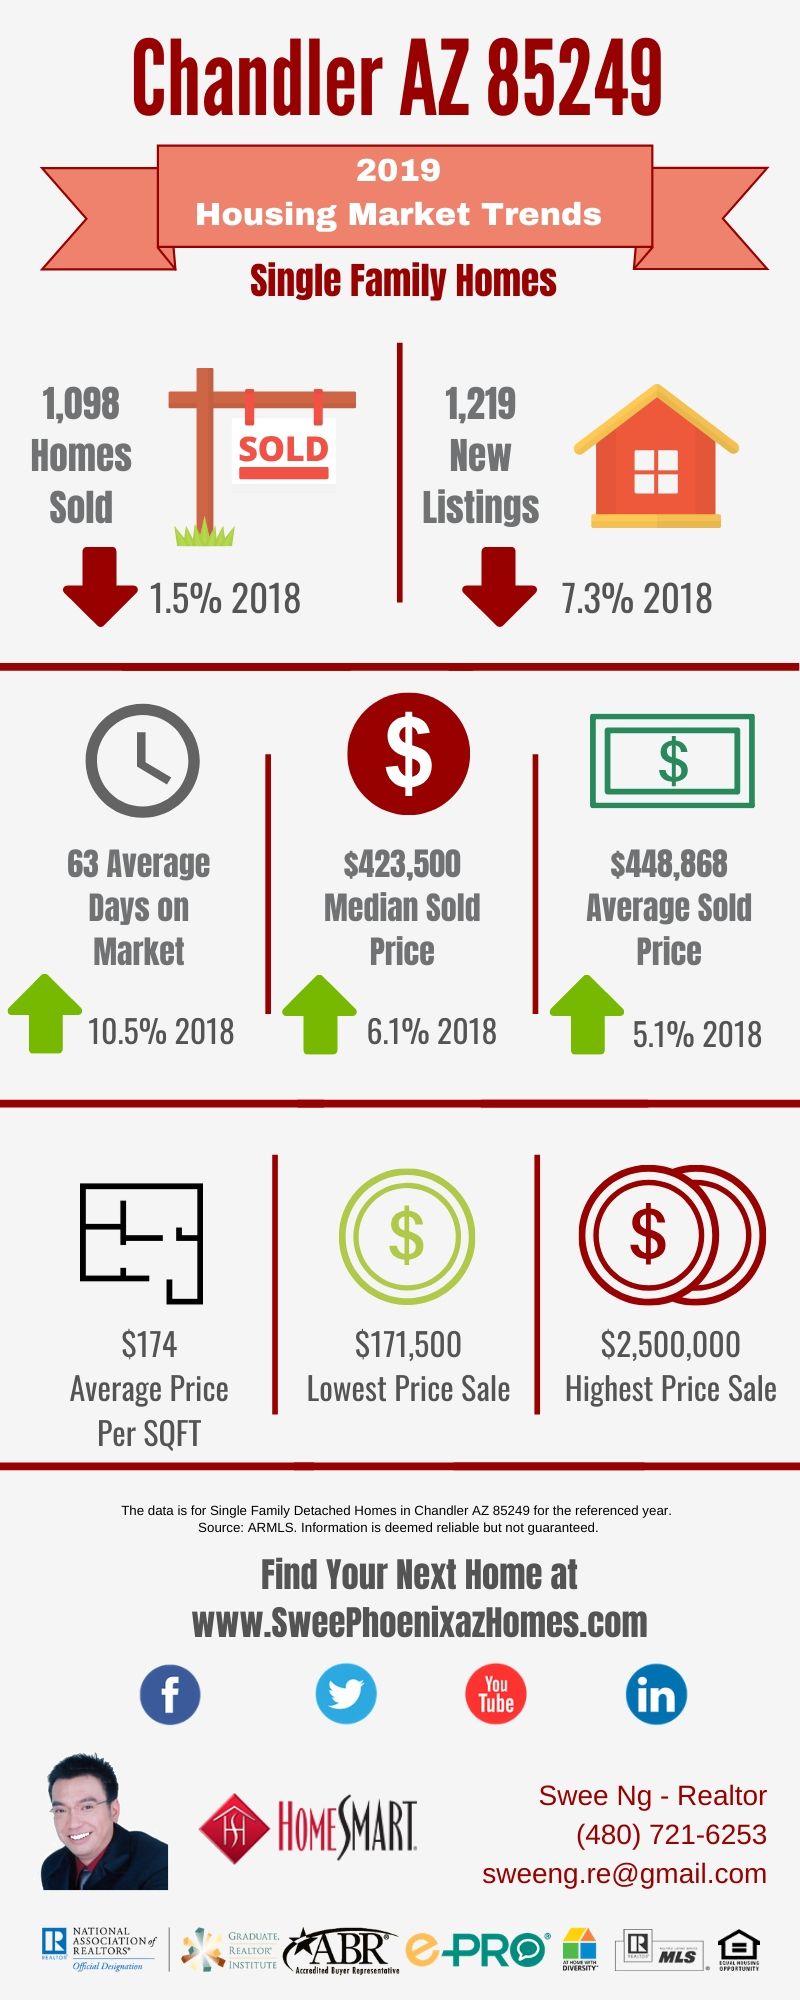 Chandler AZ 85249 Housing Market Trends Report 2019, House Value, Real Estate and Statistic by Swee Ng